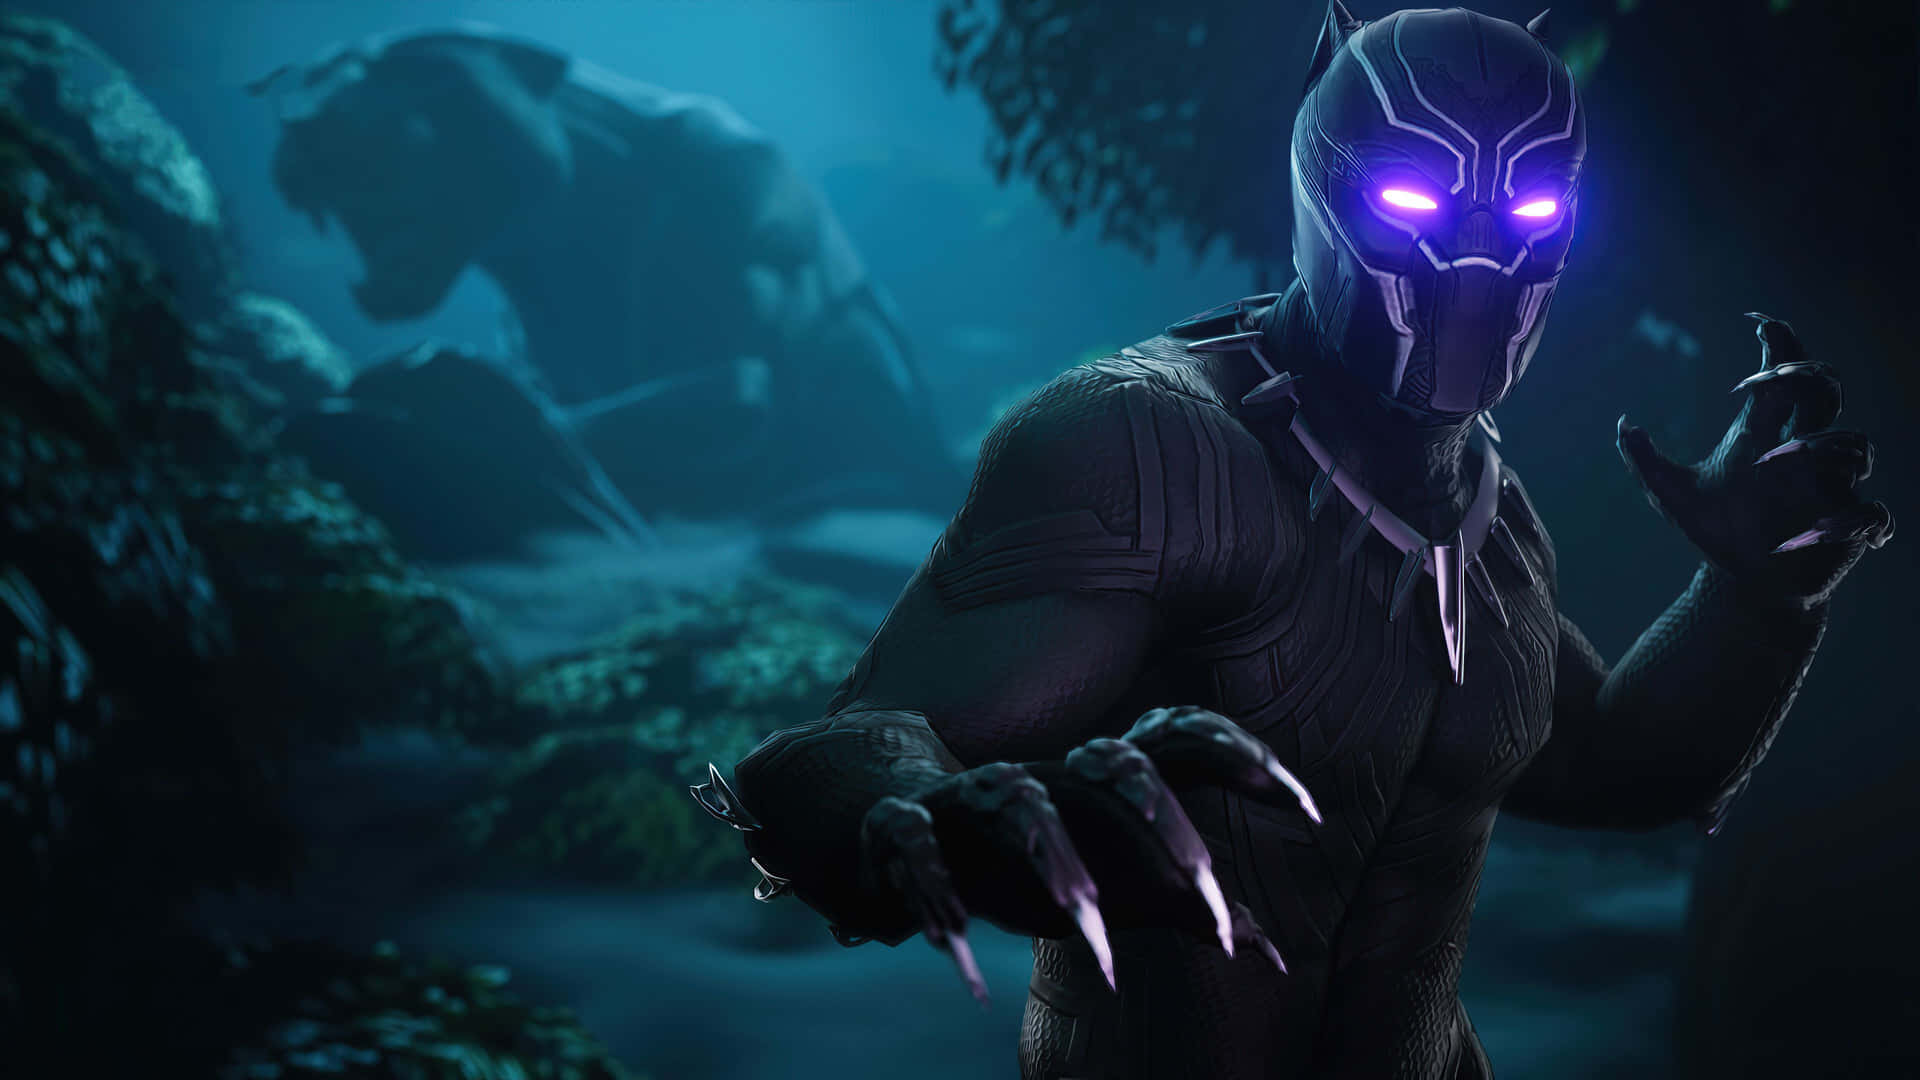 Black Panther In The Forest With Purple Eyes